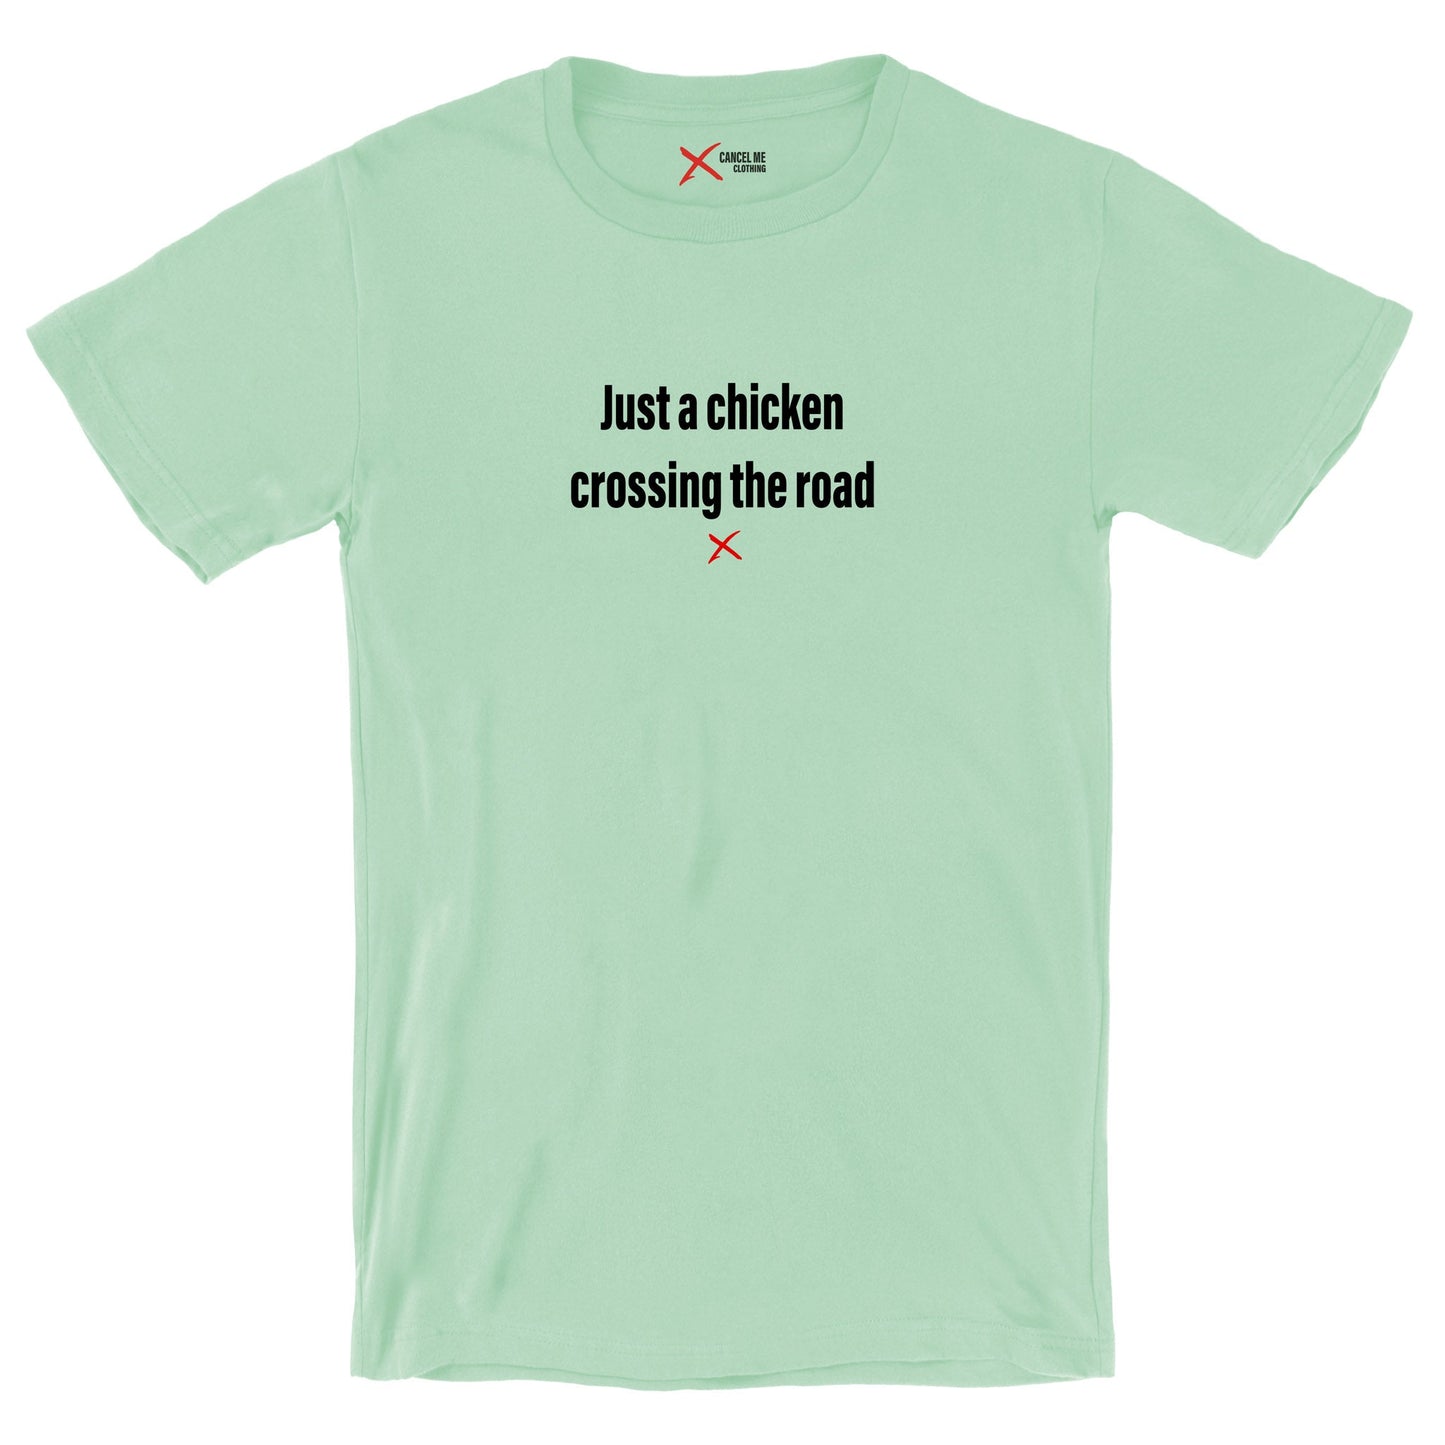 Just a chicken crossing the road - Shirt